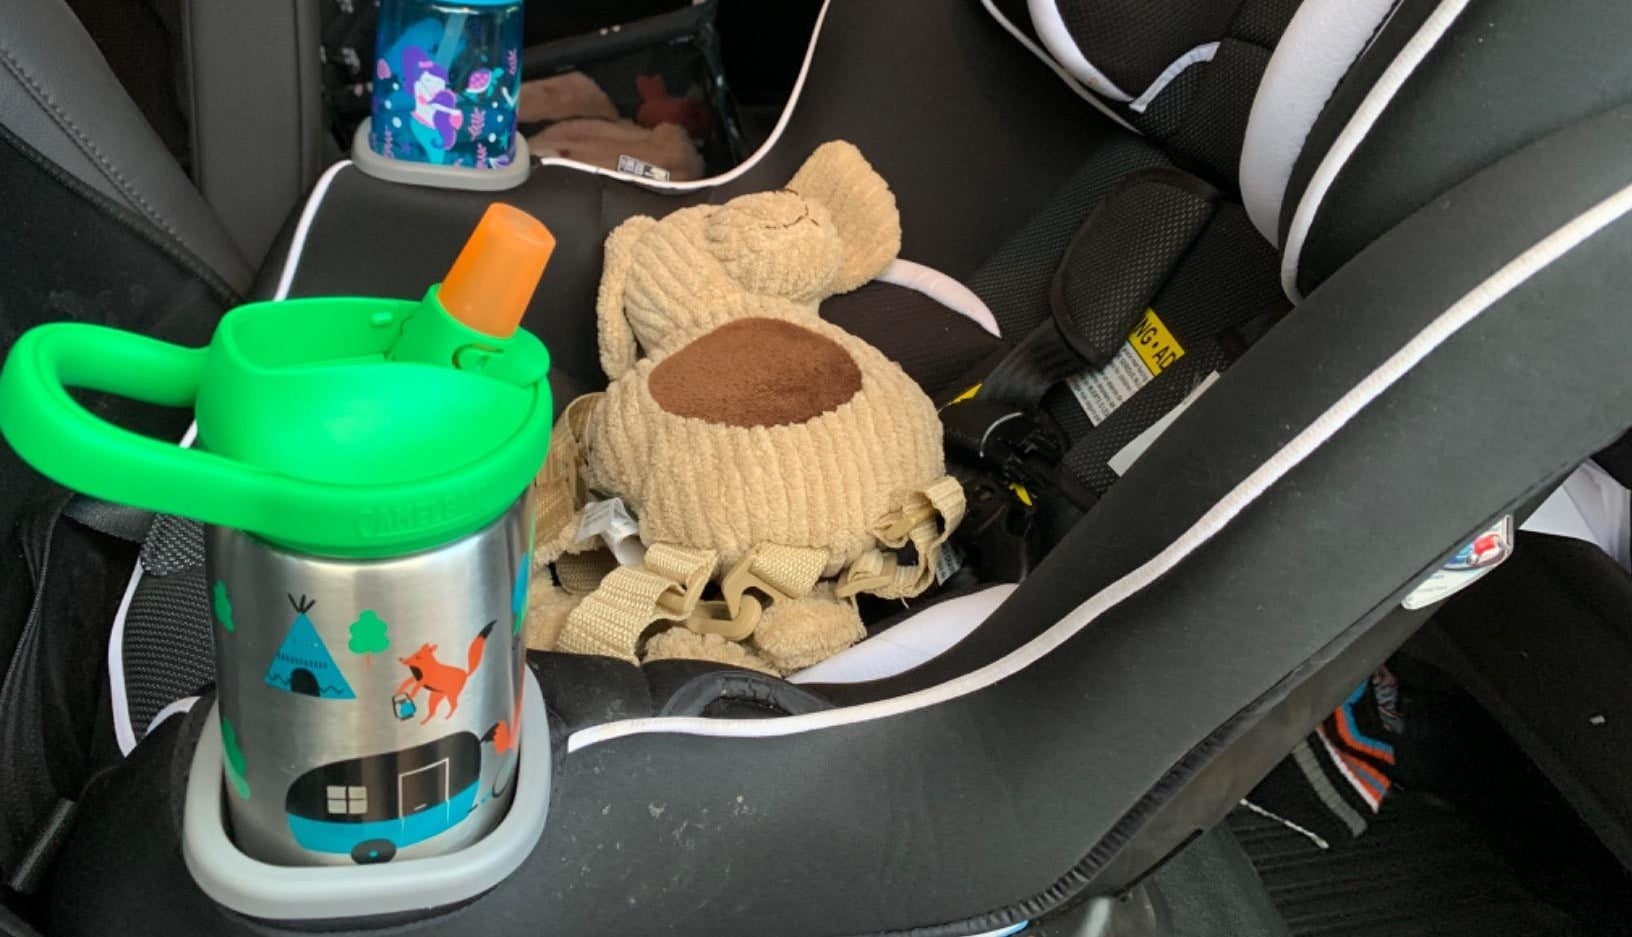 Water bottle in car seat cup holder